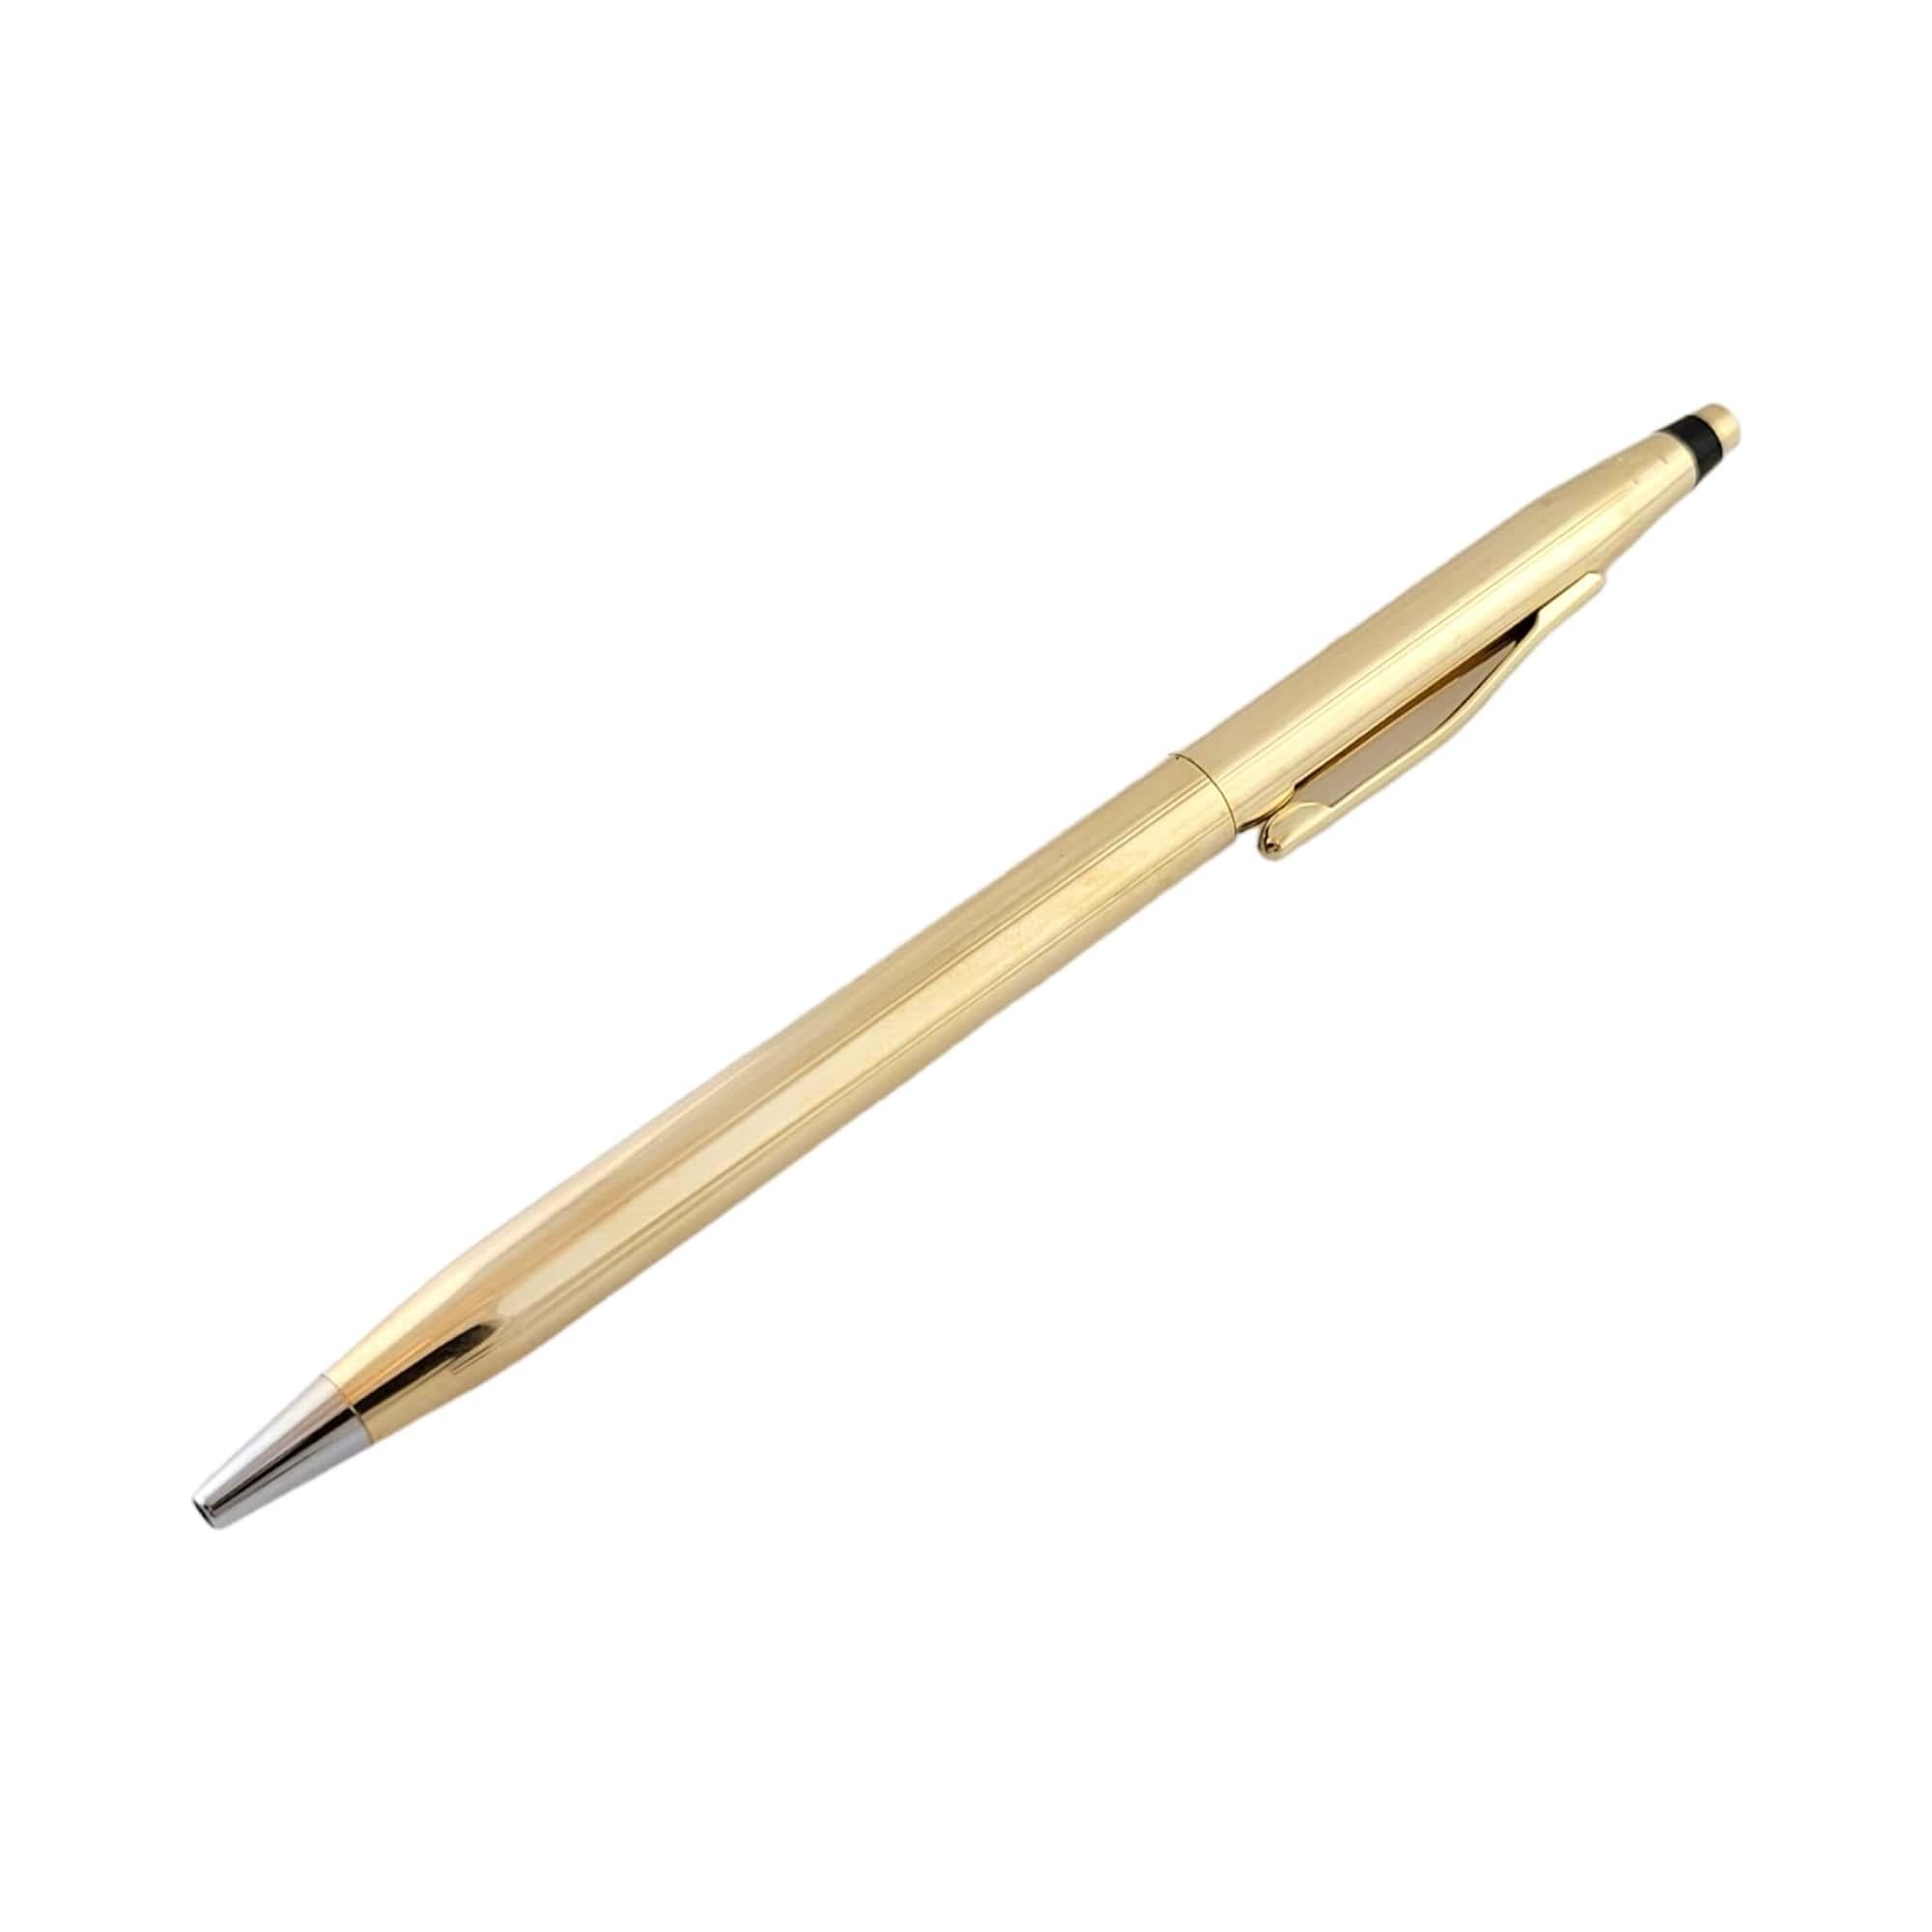 Vintage 14K Yellow Gold Cross Pen

Beautiful 14K gold cross pen with black detailing. Presently writing.

Length: 5 1/4